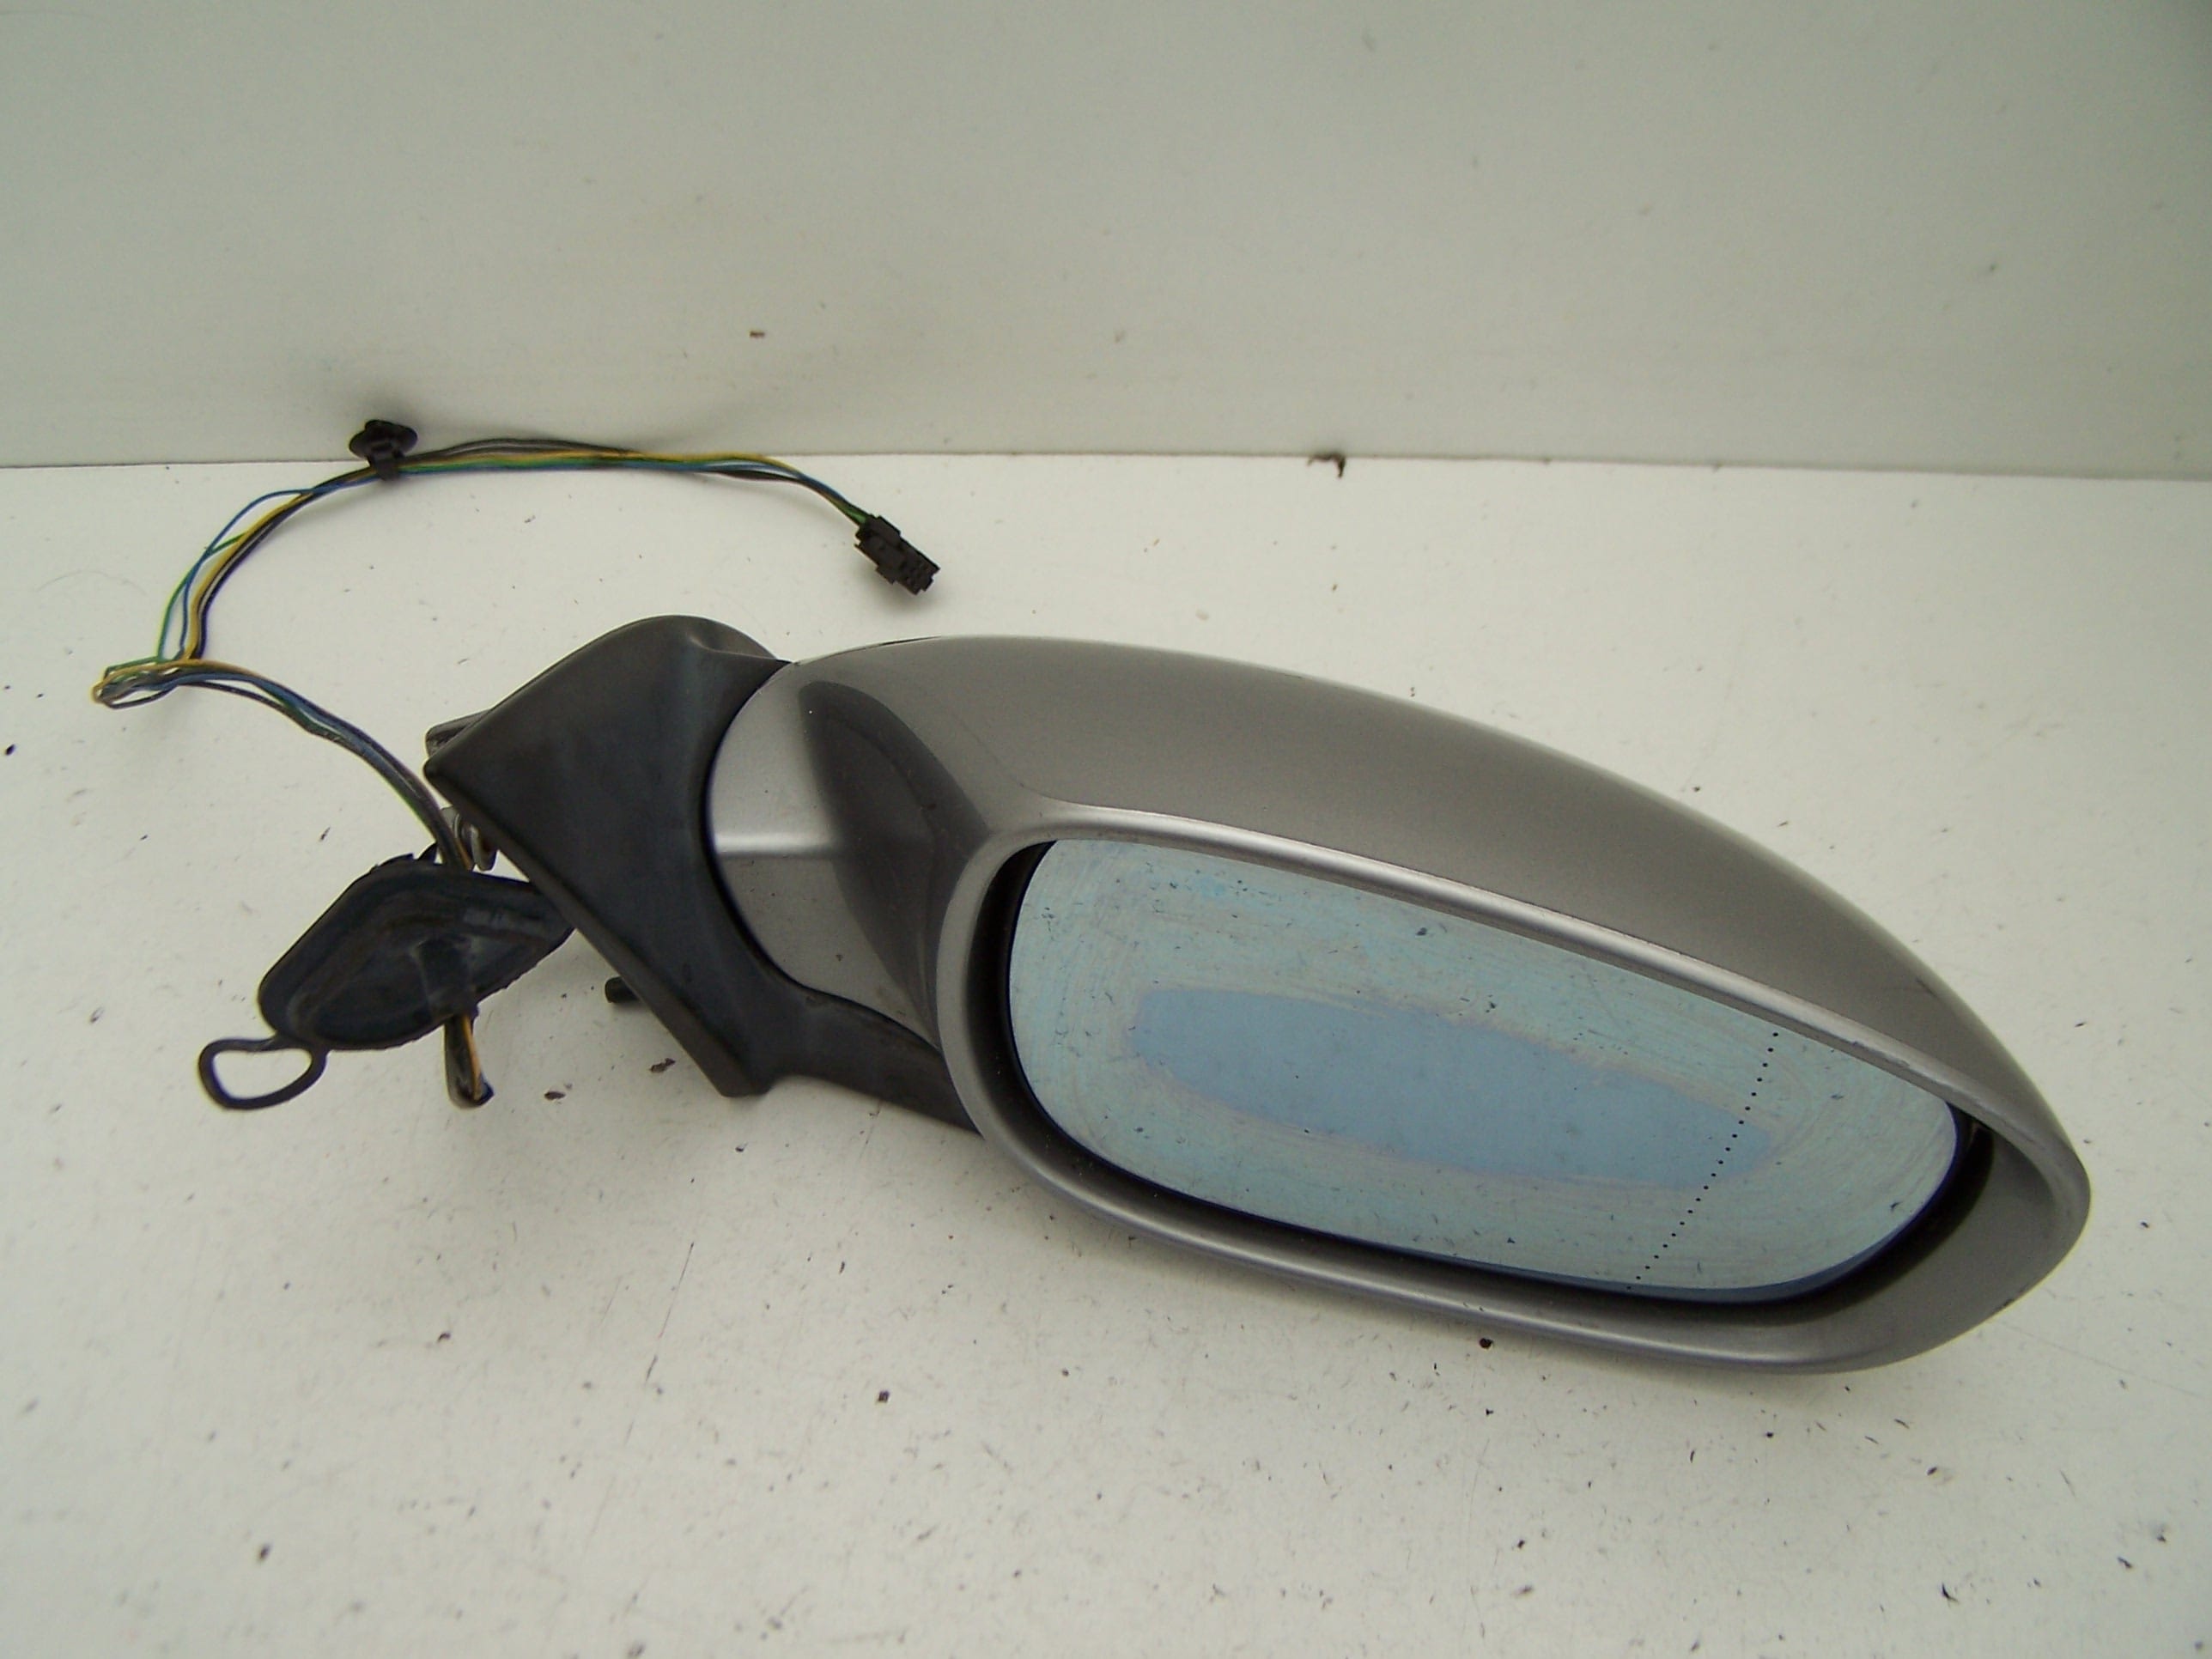 Peugeot 607 right wing mirror assembly (1999-2004)